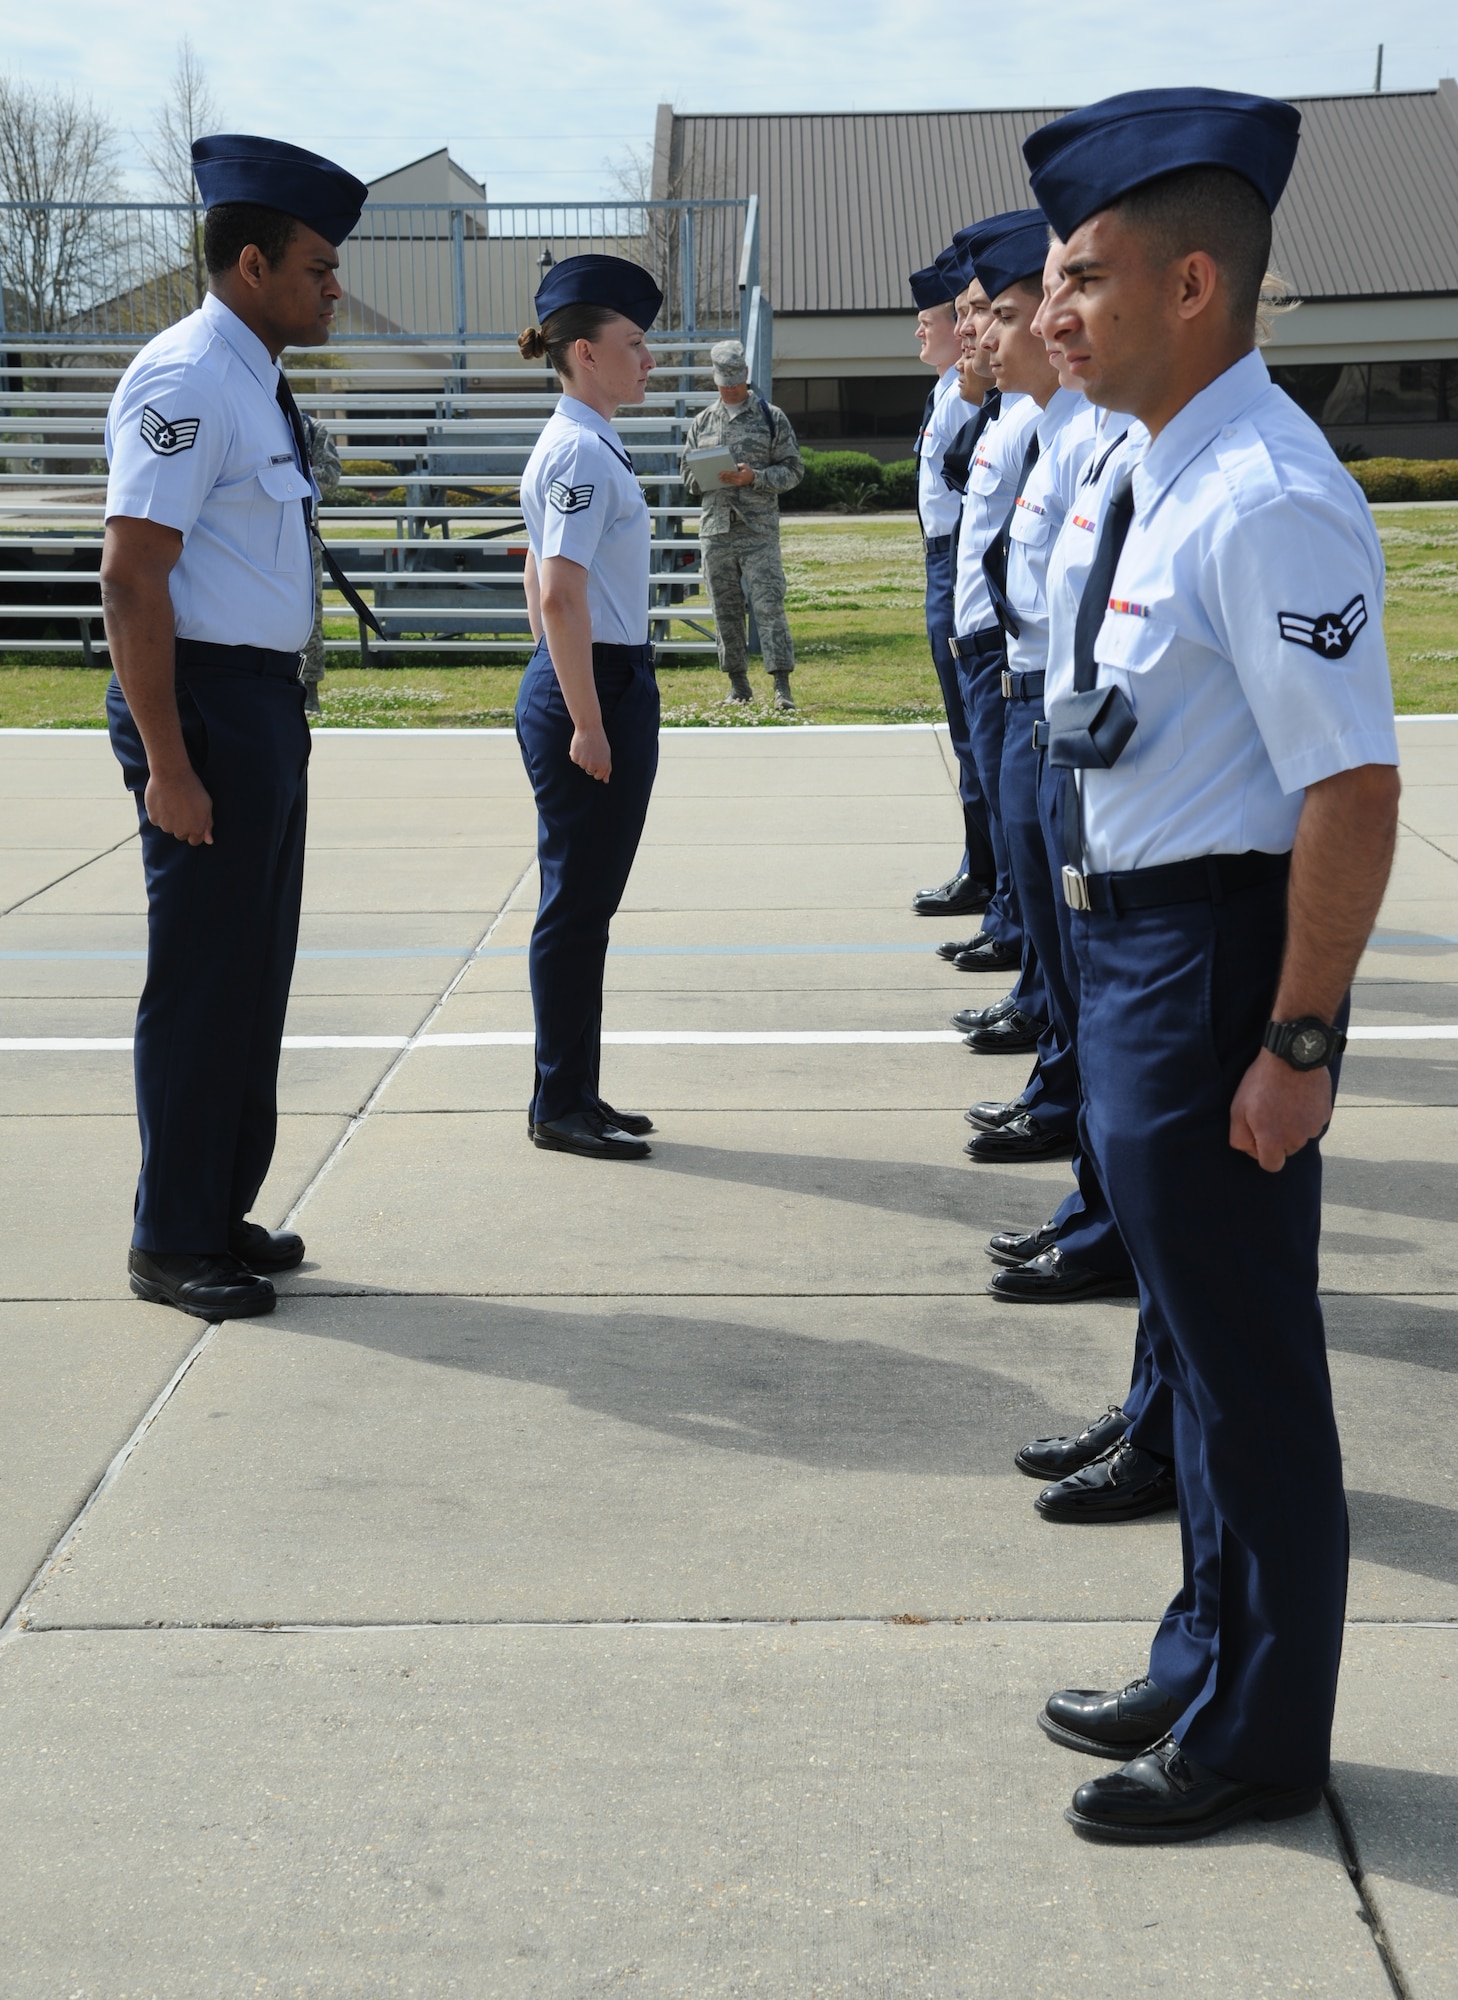 Staff Sgt. Shaun-Darius Martin, 338th Training Squadron, and Staff Sgt. Alexandria Valdez, 335th Training Squadron, conduct an open ranks inspection on a flight of 25 non-prior service students during the second annual Top Tech competition March 27, 2014, at the Levitow Training Support Facility drill pad, Keesler Air Force Base, Miss.  Top Tech is an 81st Training Support Squadron competition that allows instructors to compete with their peers to hone skills and improve the overall instructor and military training leader corps. (U,S. Air Force photo by Kemberly Groue)